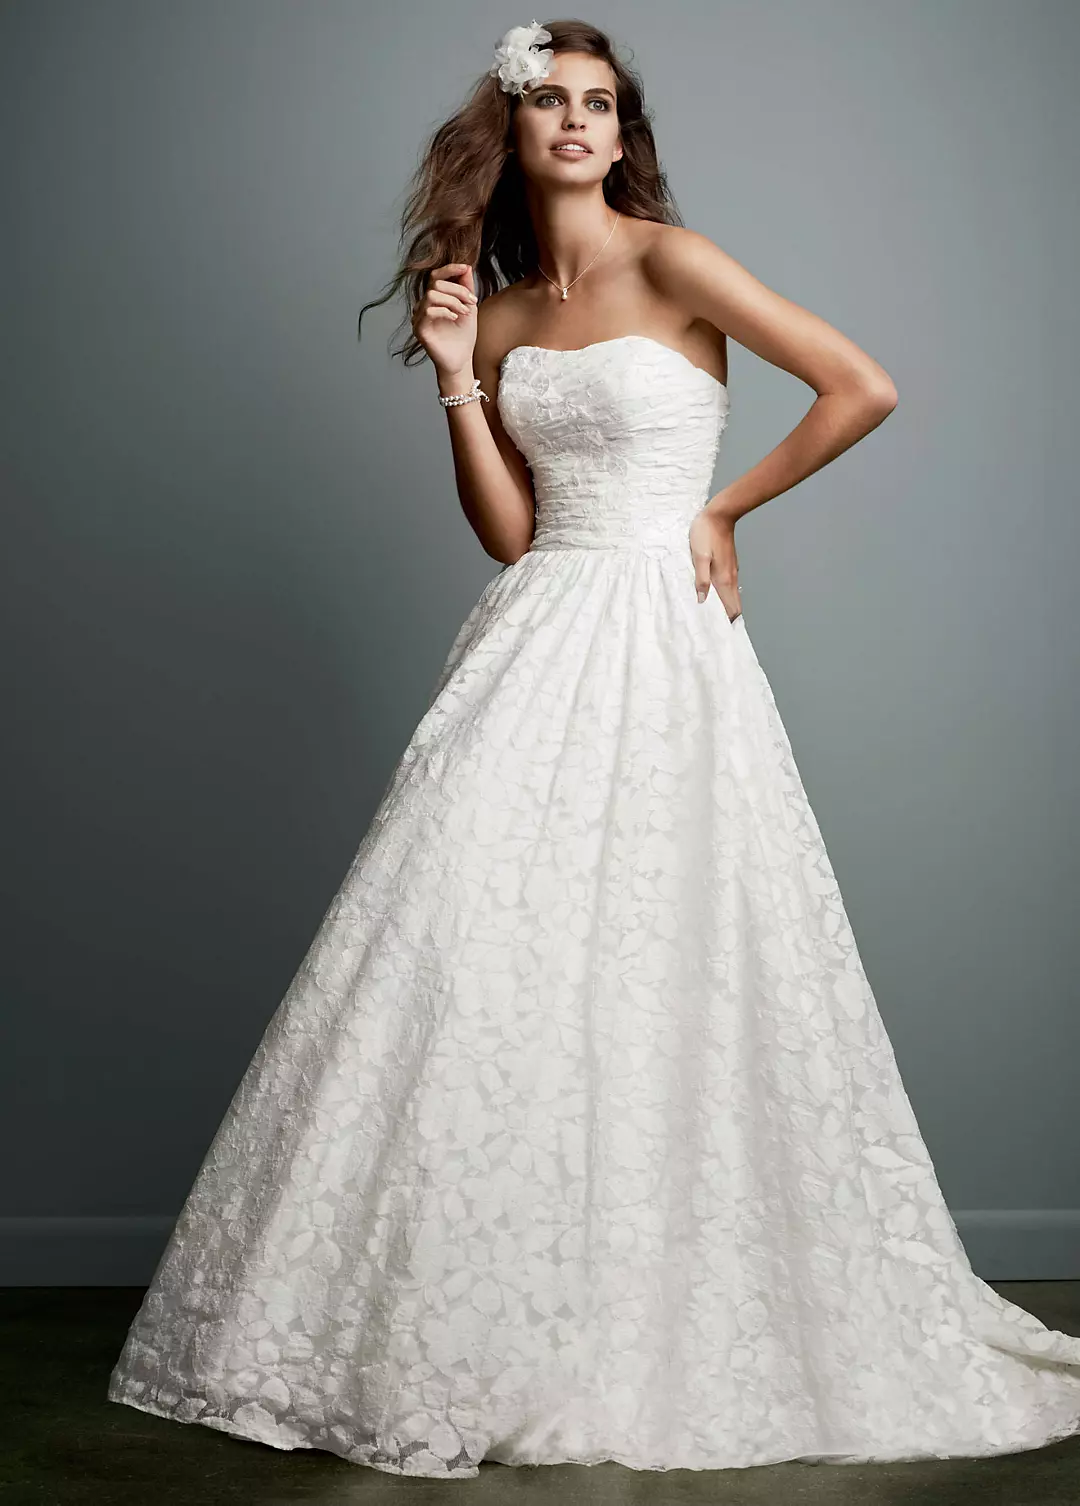 Lace Ball Gown with Intricate Embroidered Details Image